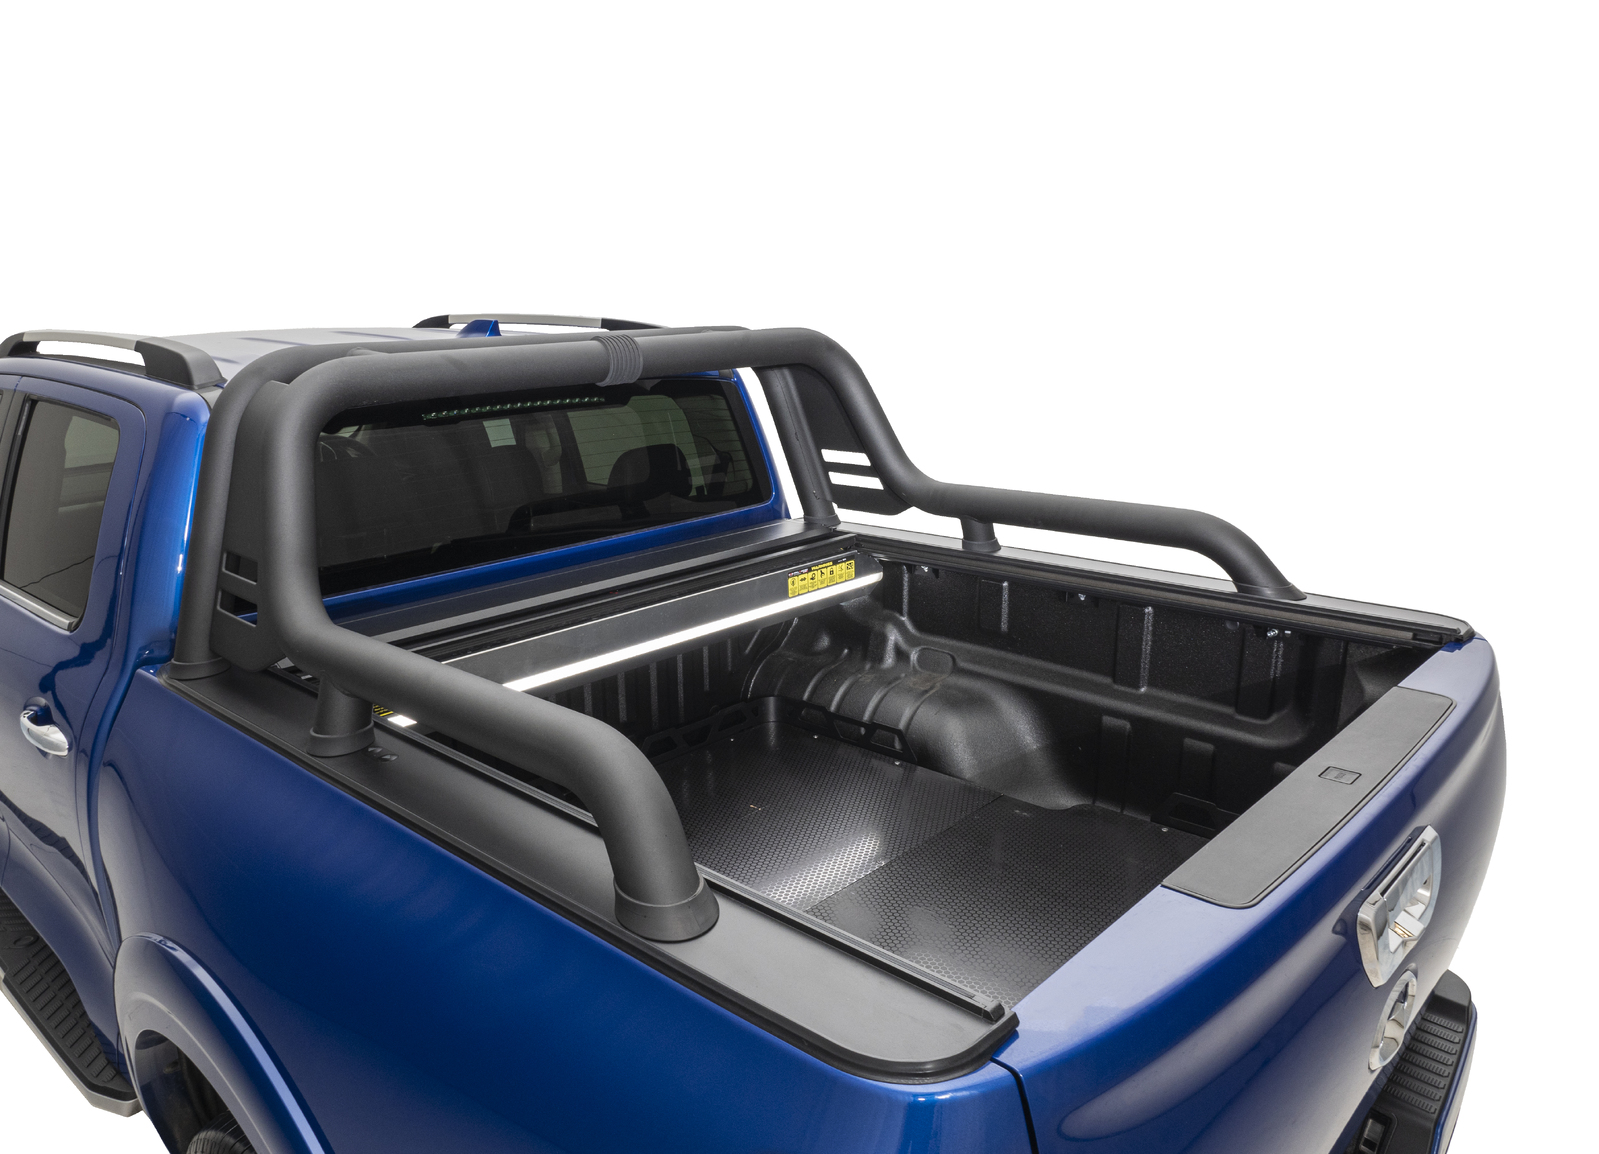 HSP Roll R Cover S3 To Suit GWM Haval Cannon With Genuine Extended Sports Bar (2020-On)